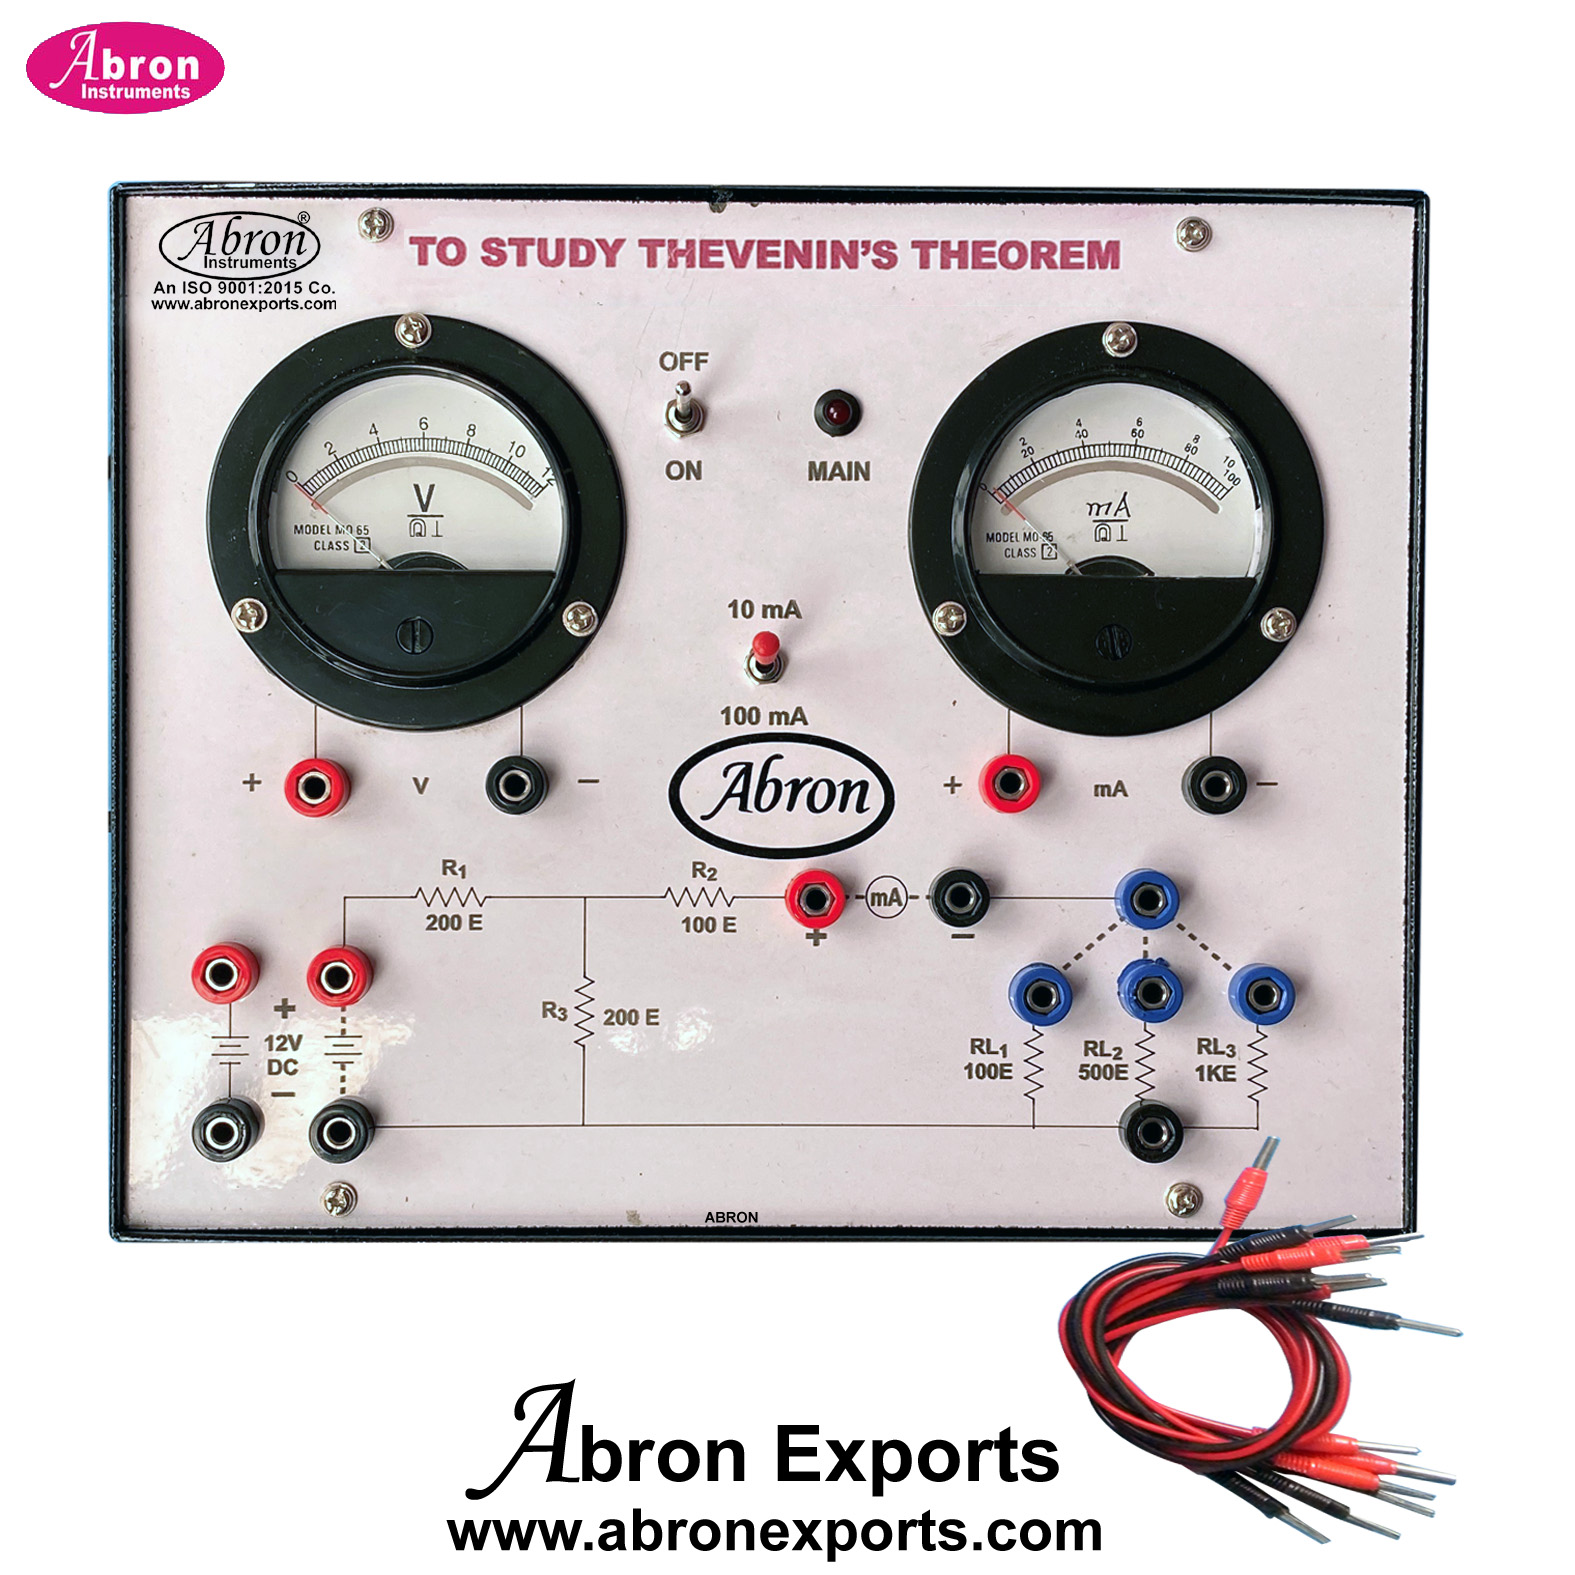 Study Theorem Theveinins Network Theorem With Power Supply 2 Meters Electronic Trainer Kit Abron AE-1430THV 